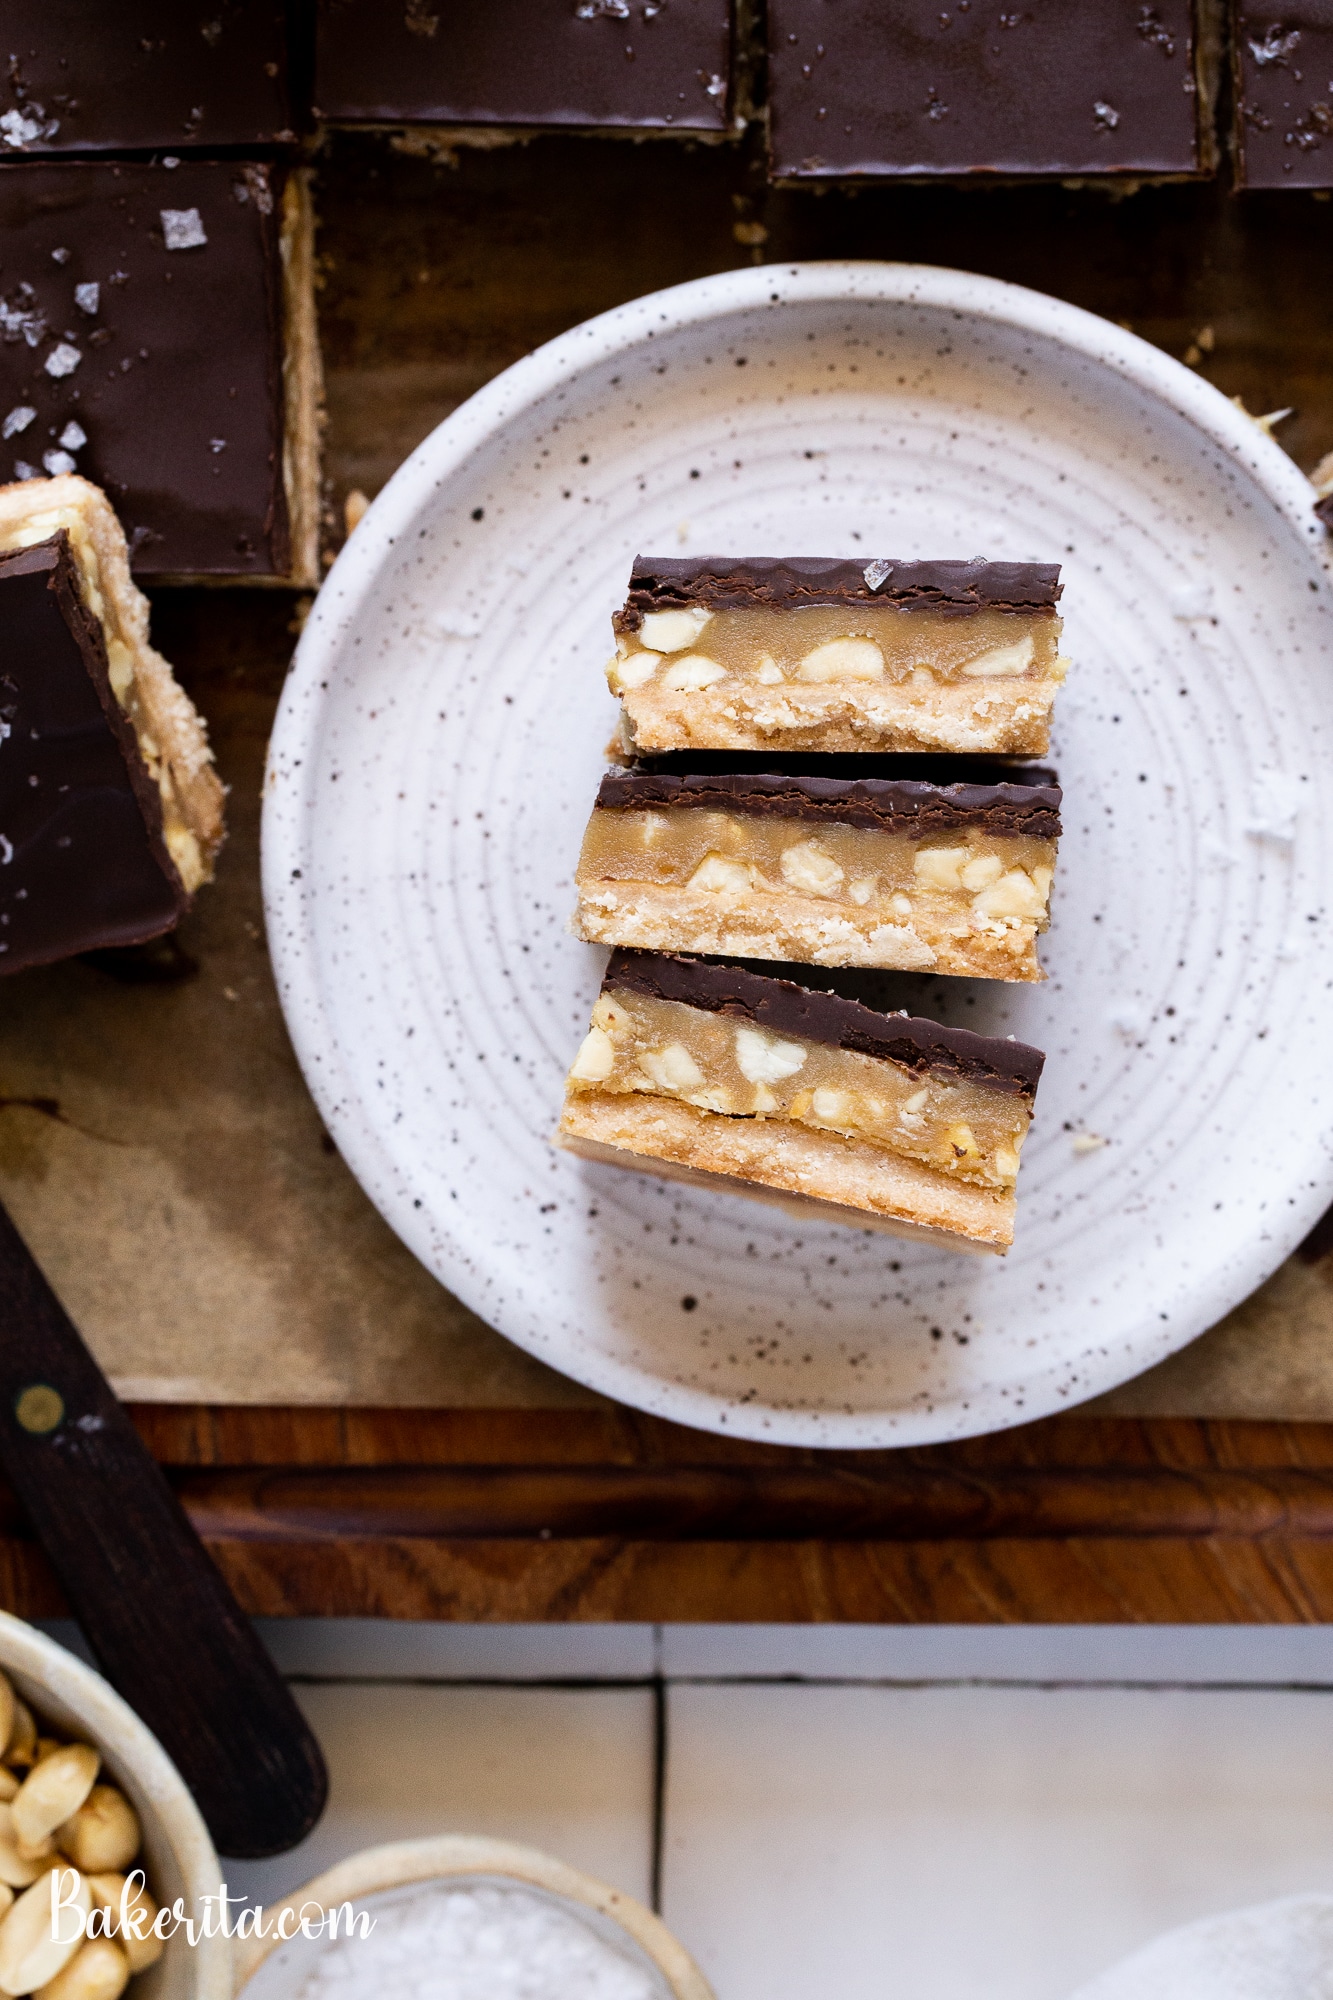 Calling all peanut butter lovers! These Gluten-Free Vegan Peanut Butter Millionaire's Shortbread will knock your socks off. They have a layer of coconut flour shortbread, a quick no-cook peanut butter caramel, and a layer of dark chocolate.